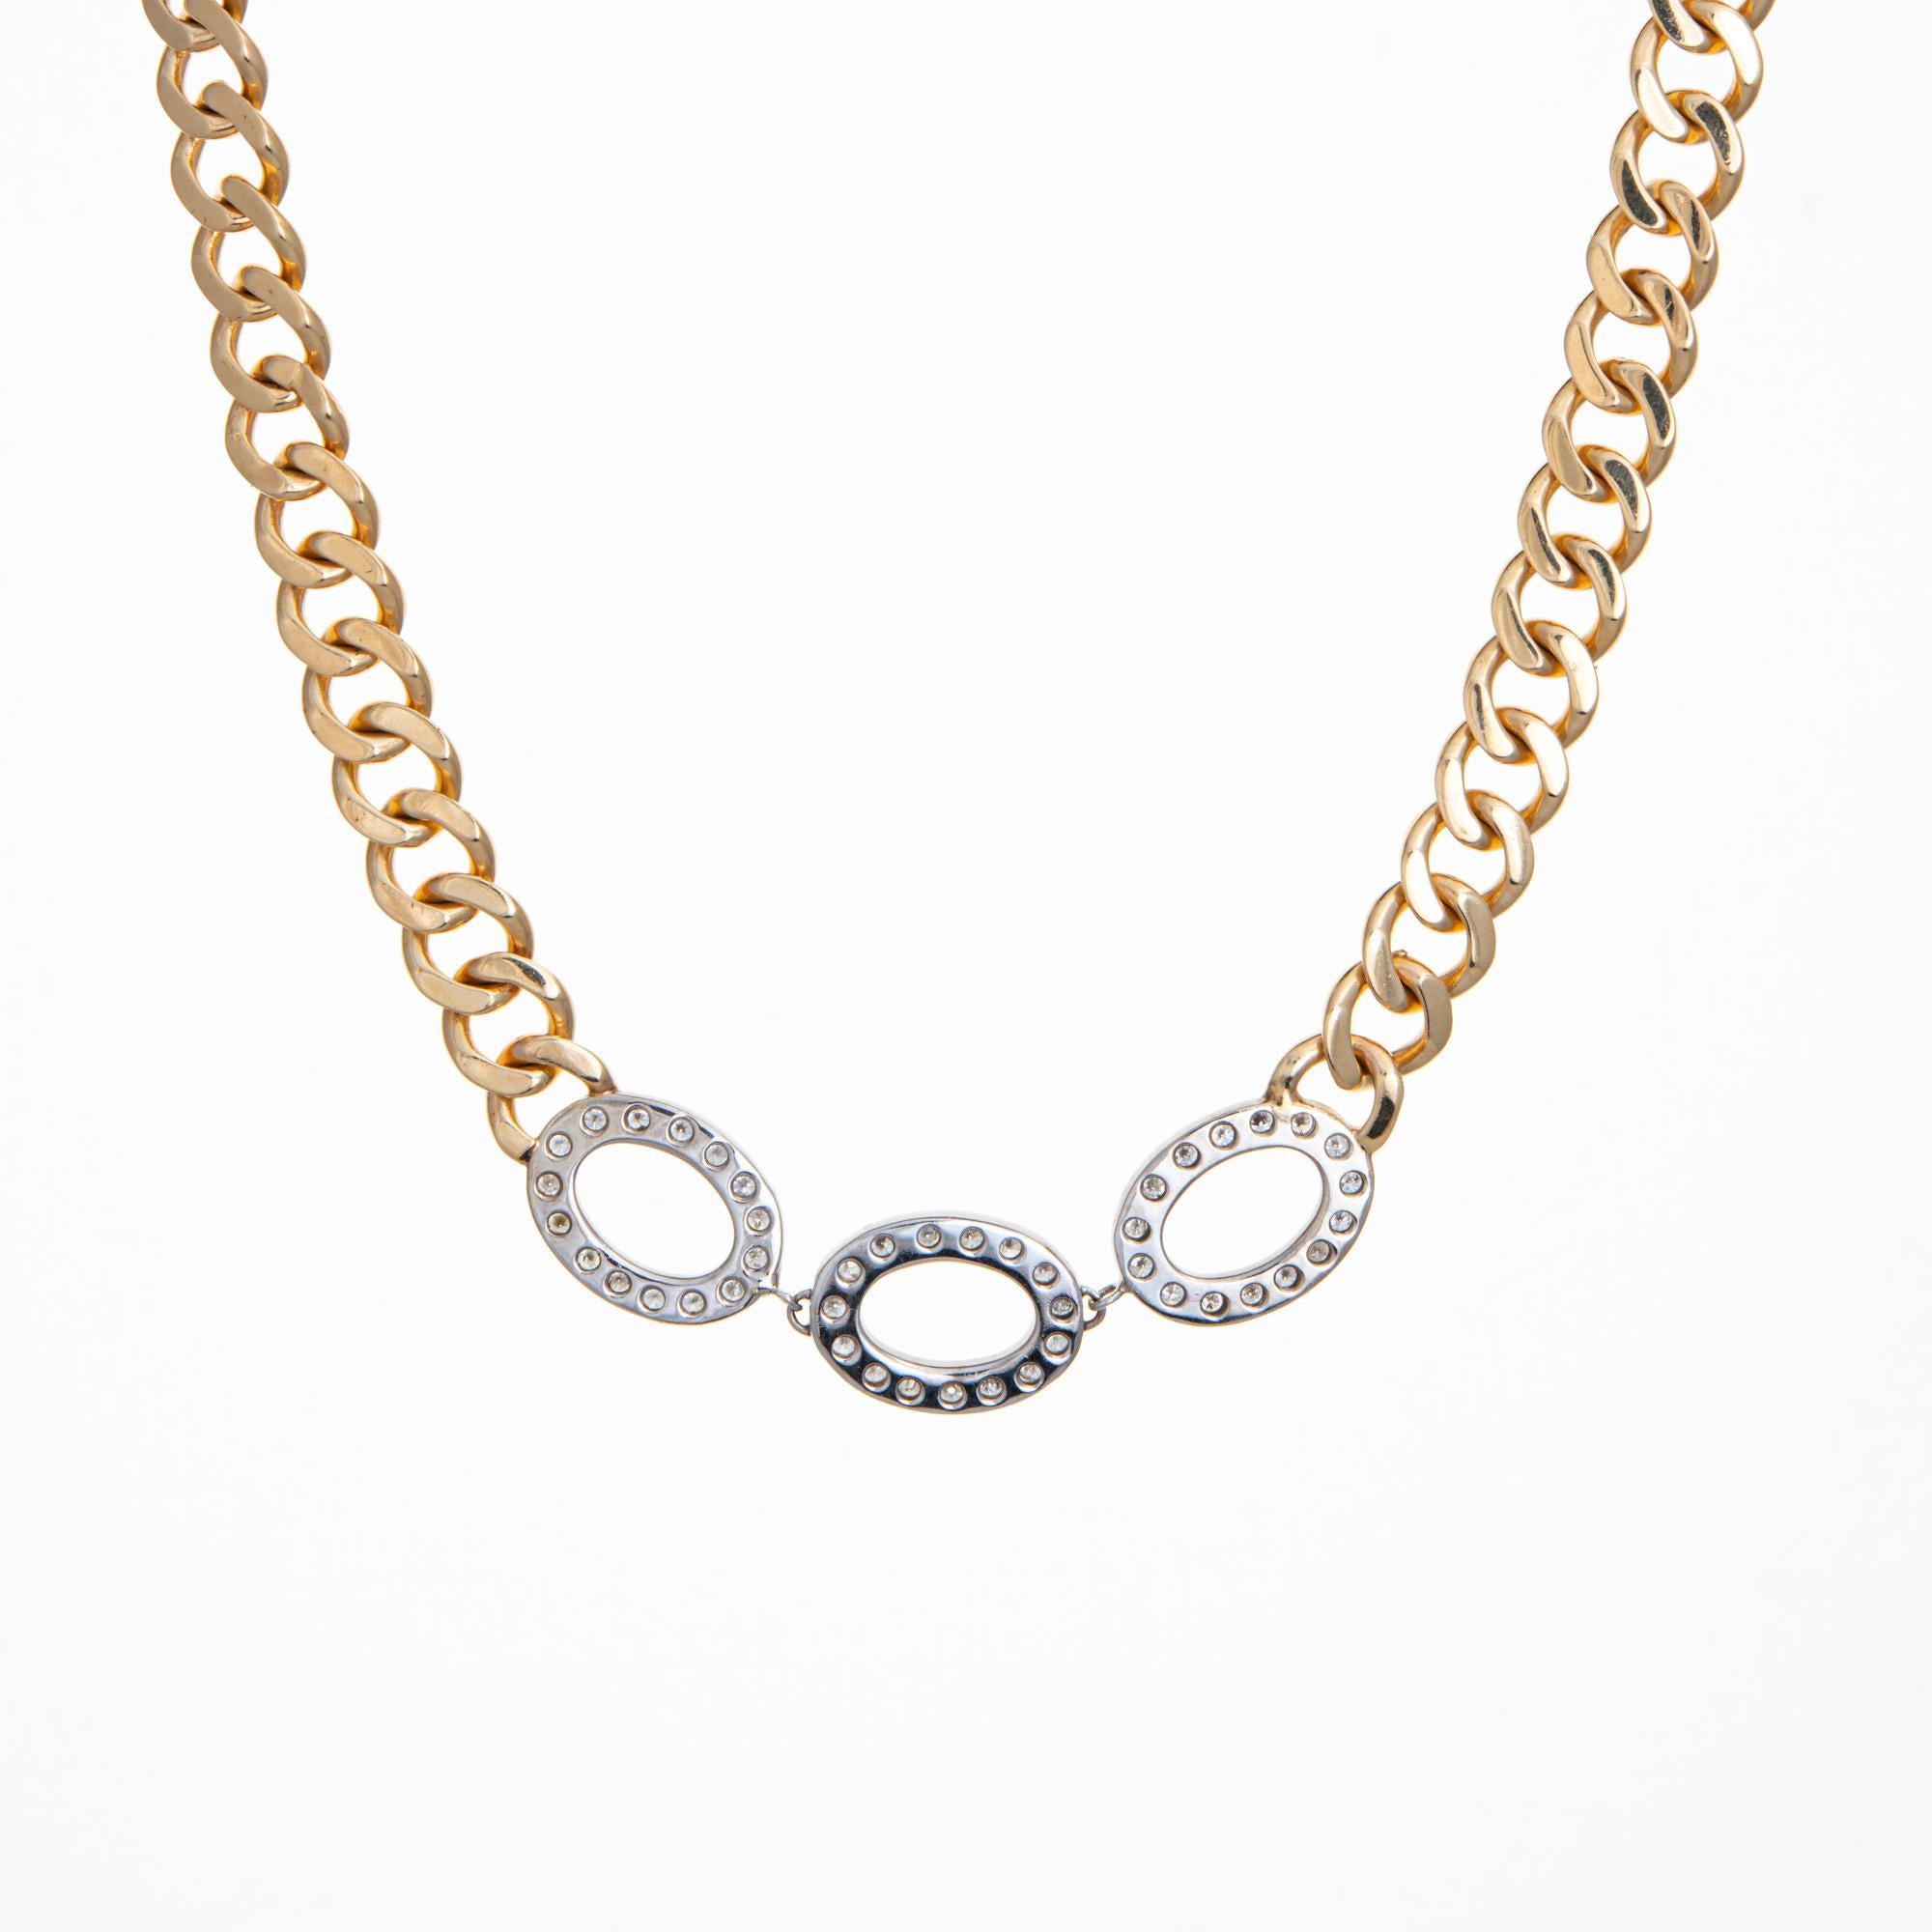 Stylish vintage diamond curb link necklace crafted in 14k yellow gold (circa 1980s).  

Round brilliant cut diamonds total an estimated 1 carat (estimated at I-J color and SI1-I1 clarity).

The choker length necklace sits nicely at the nape of the